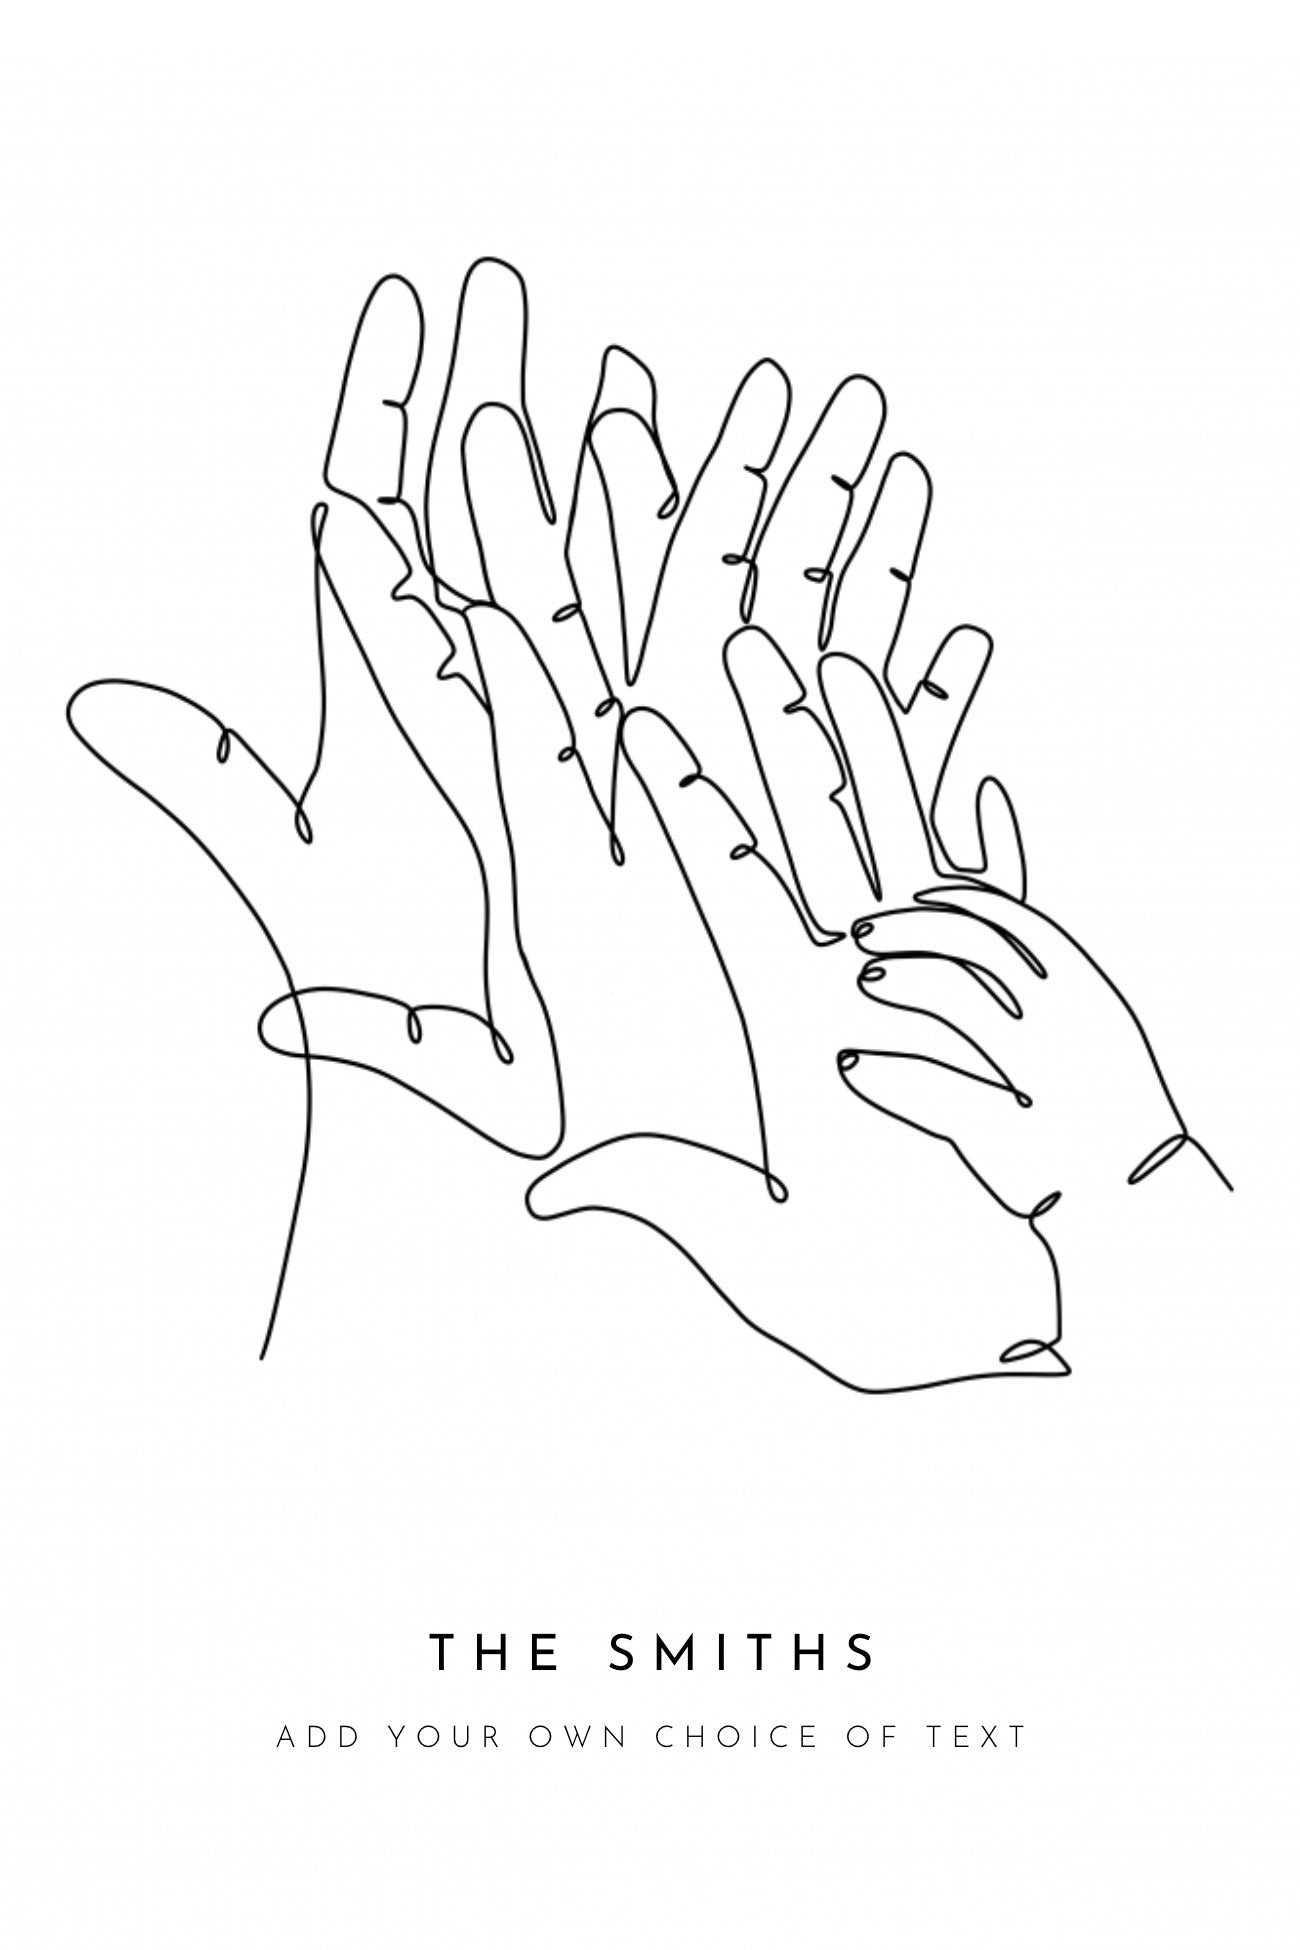 Five Connected Line Hands Print